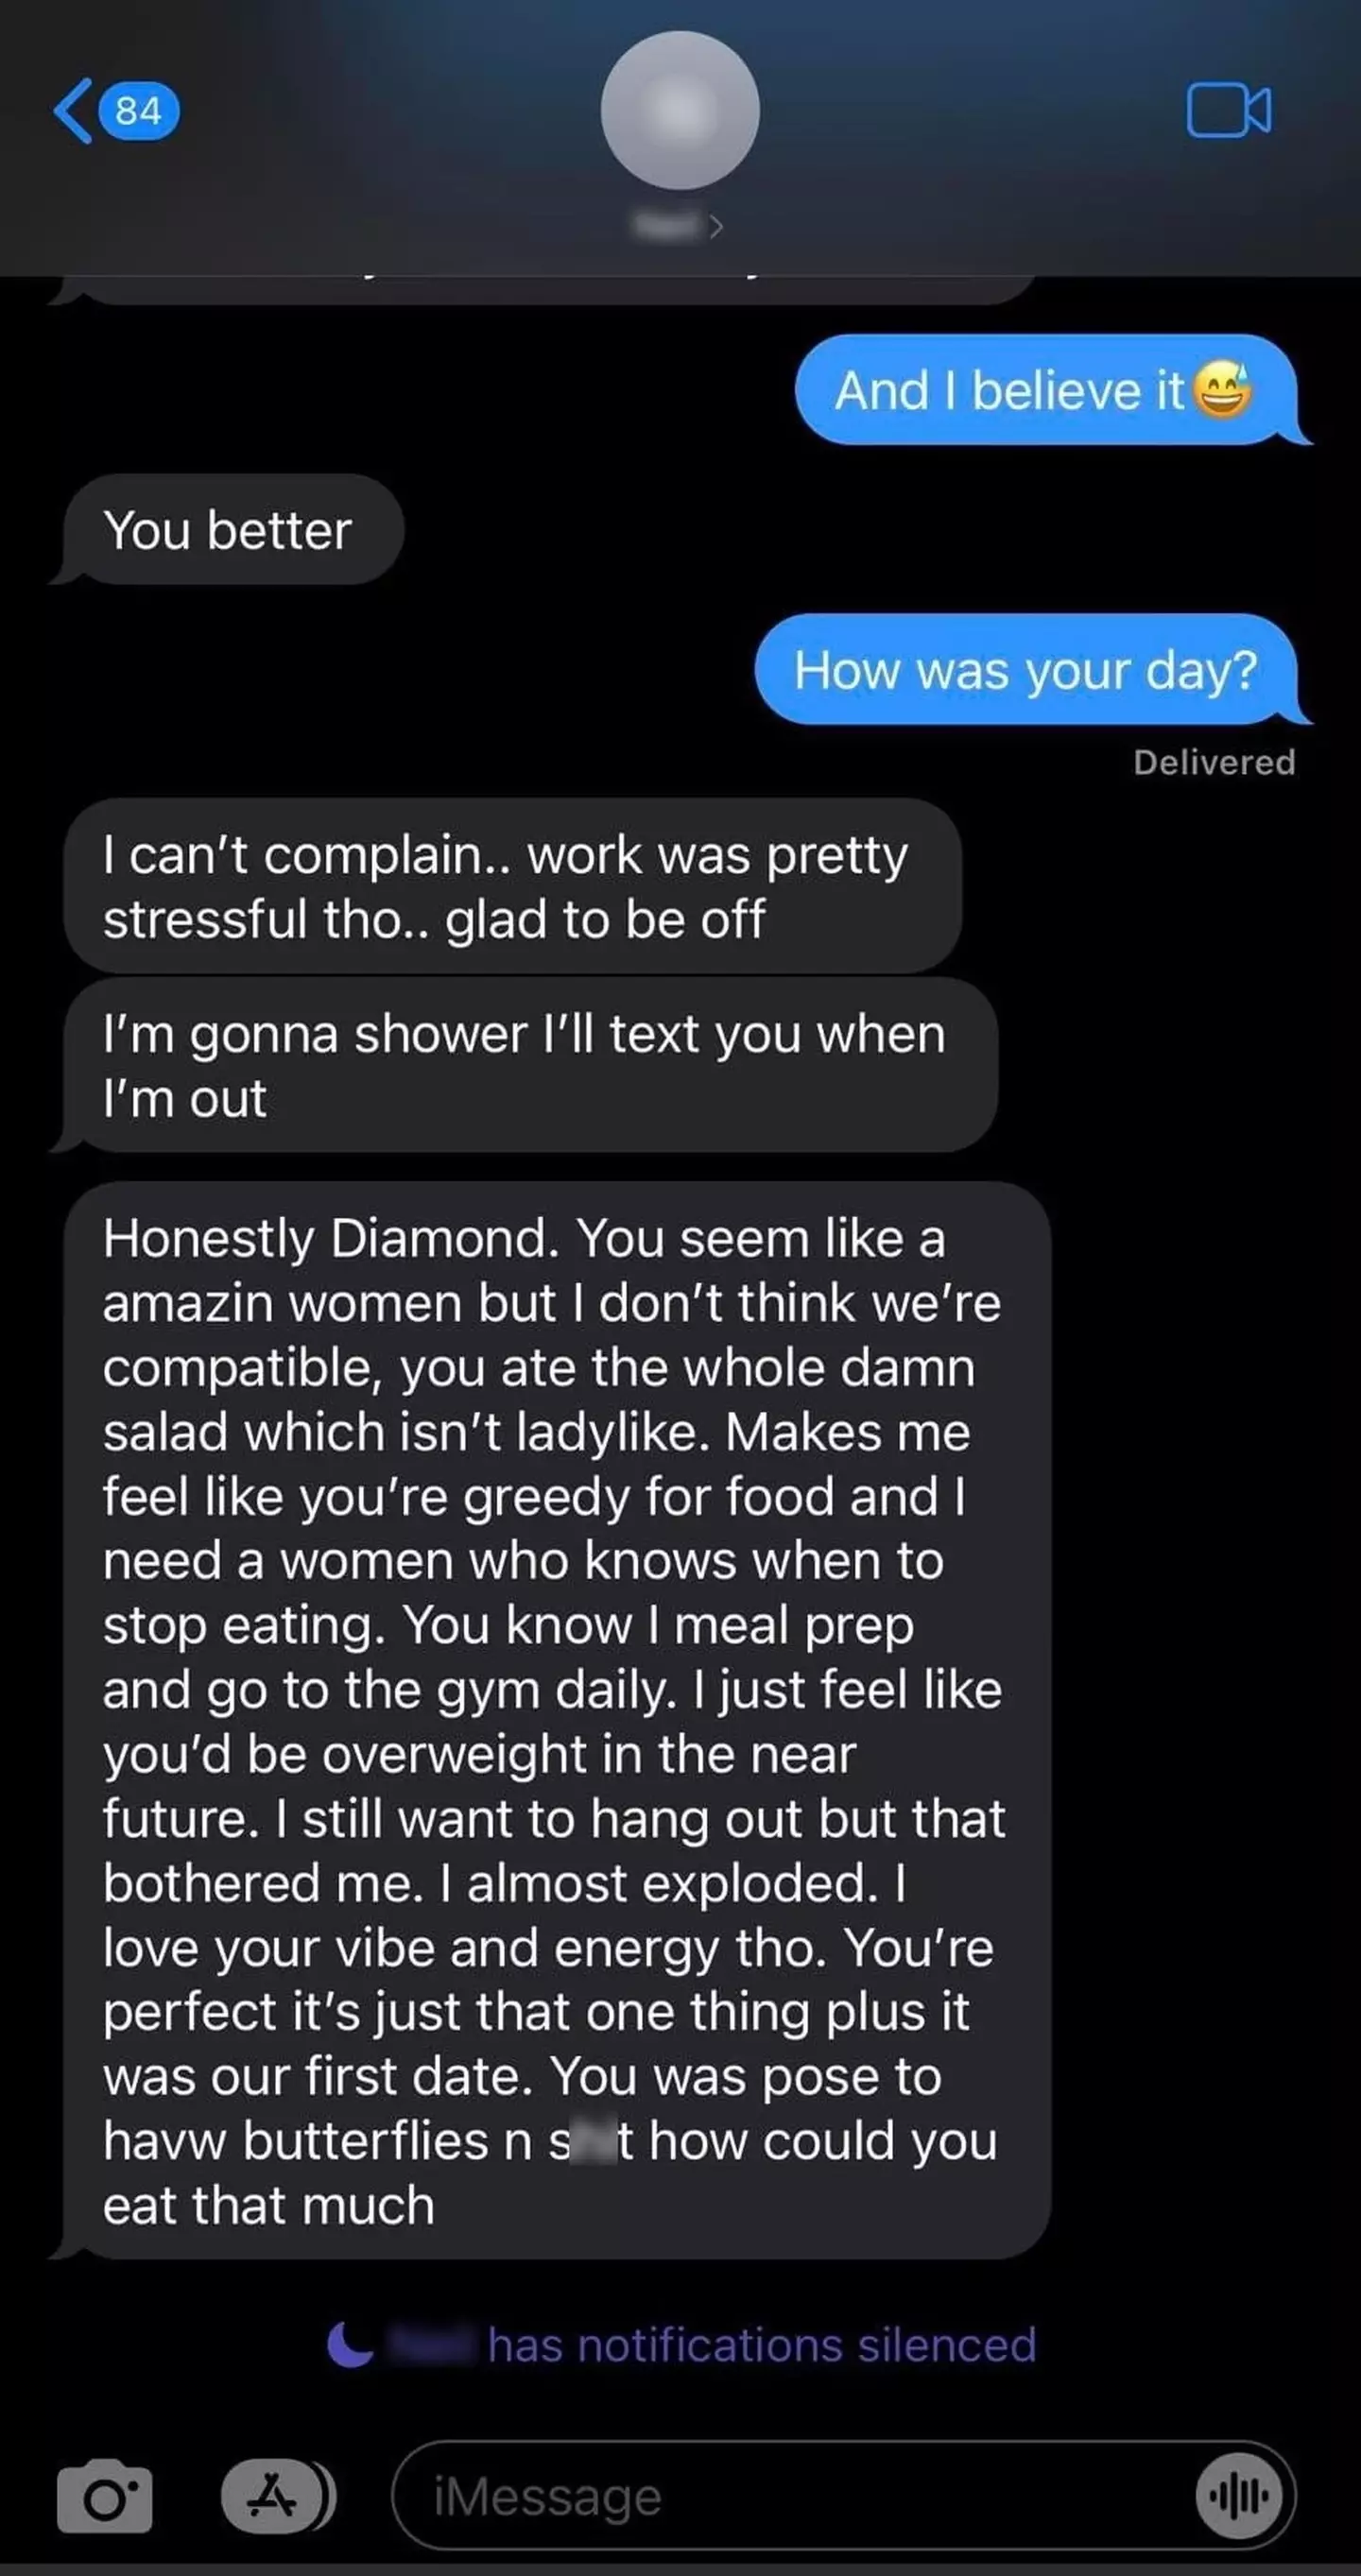 This man rejected his date for eating a salad.